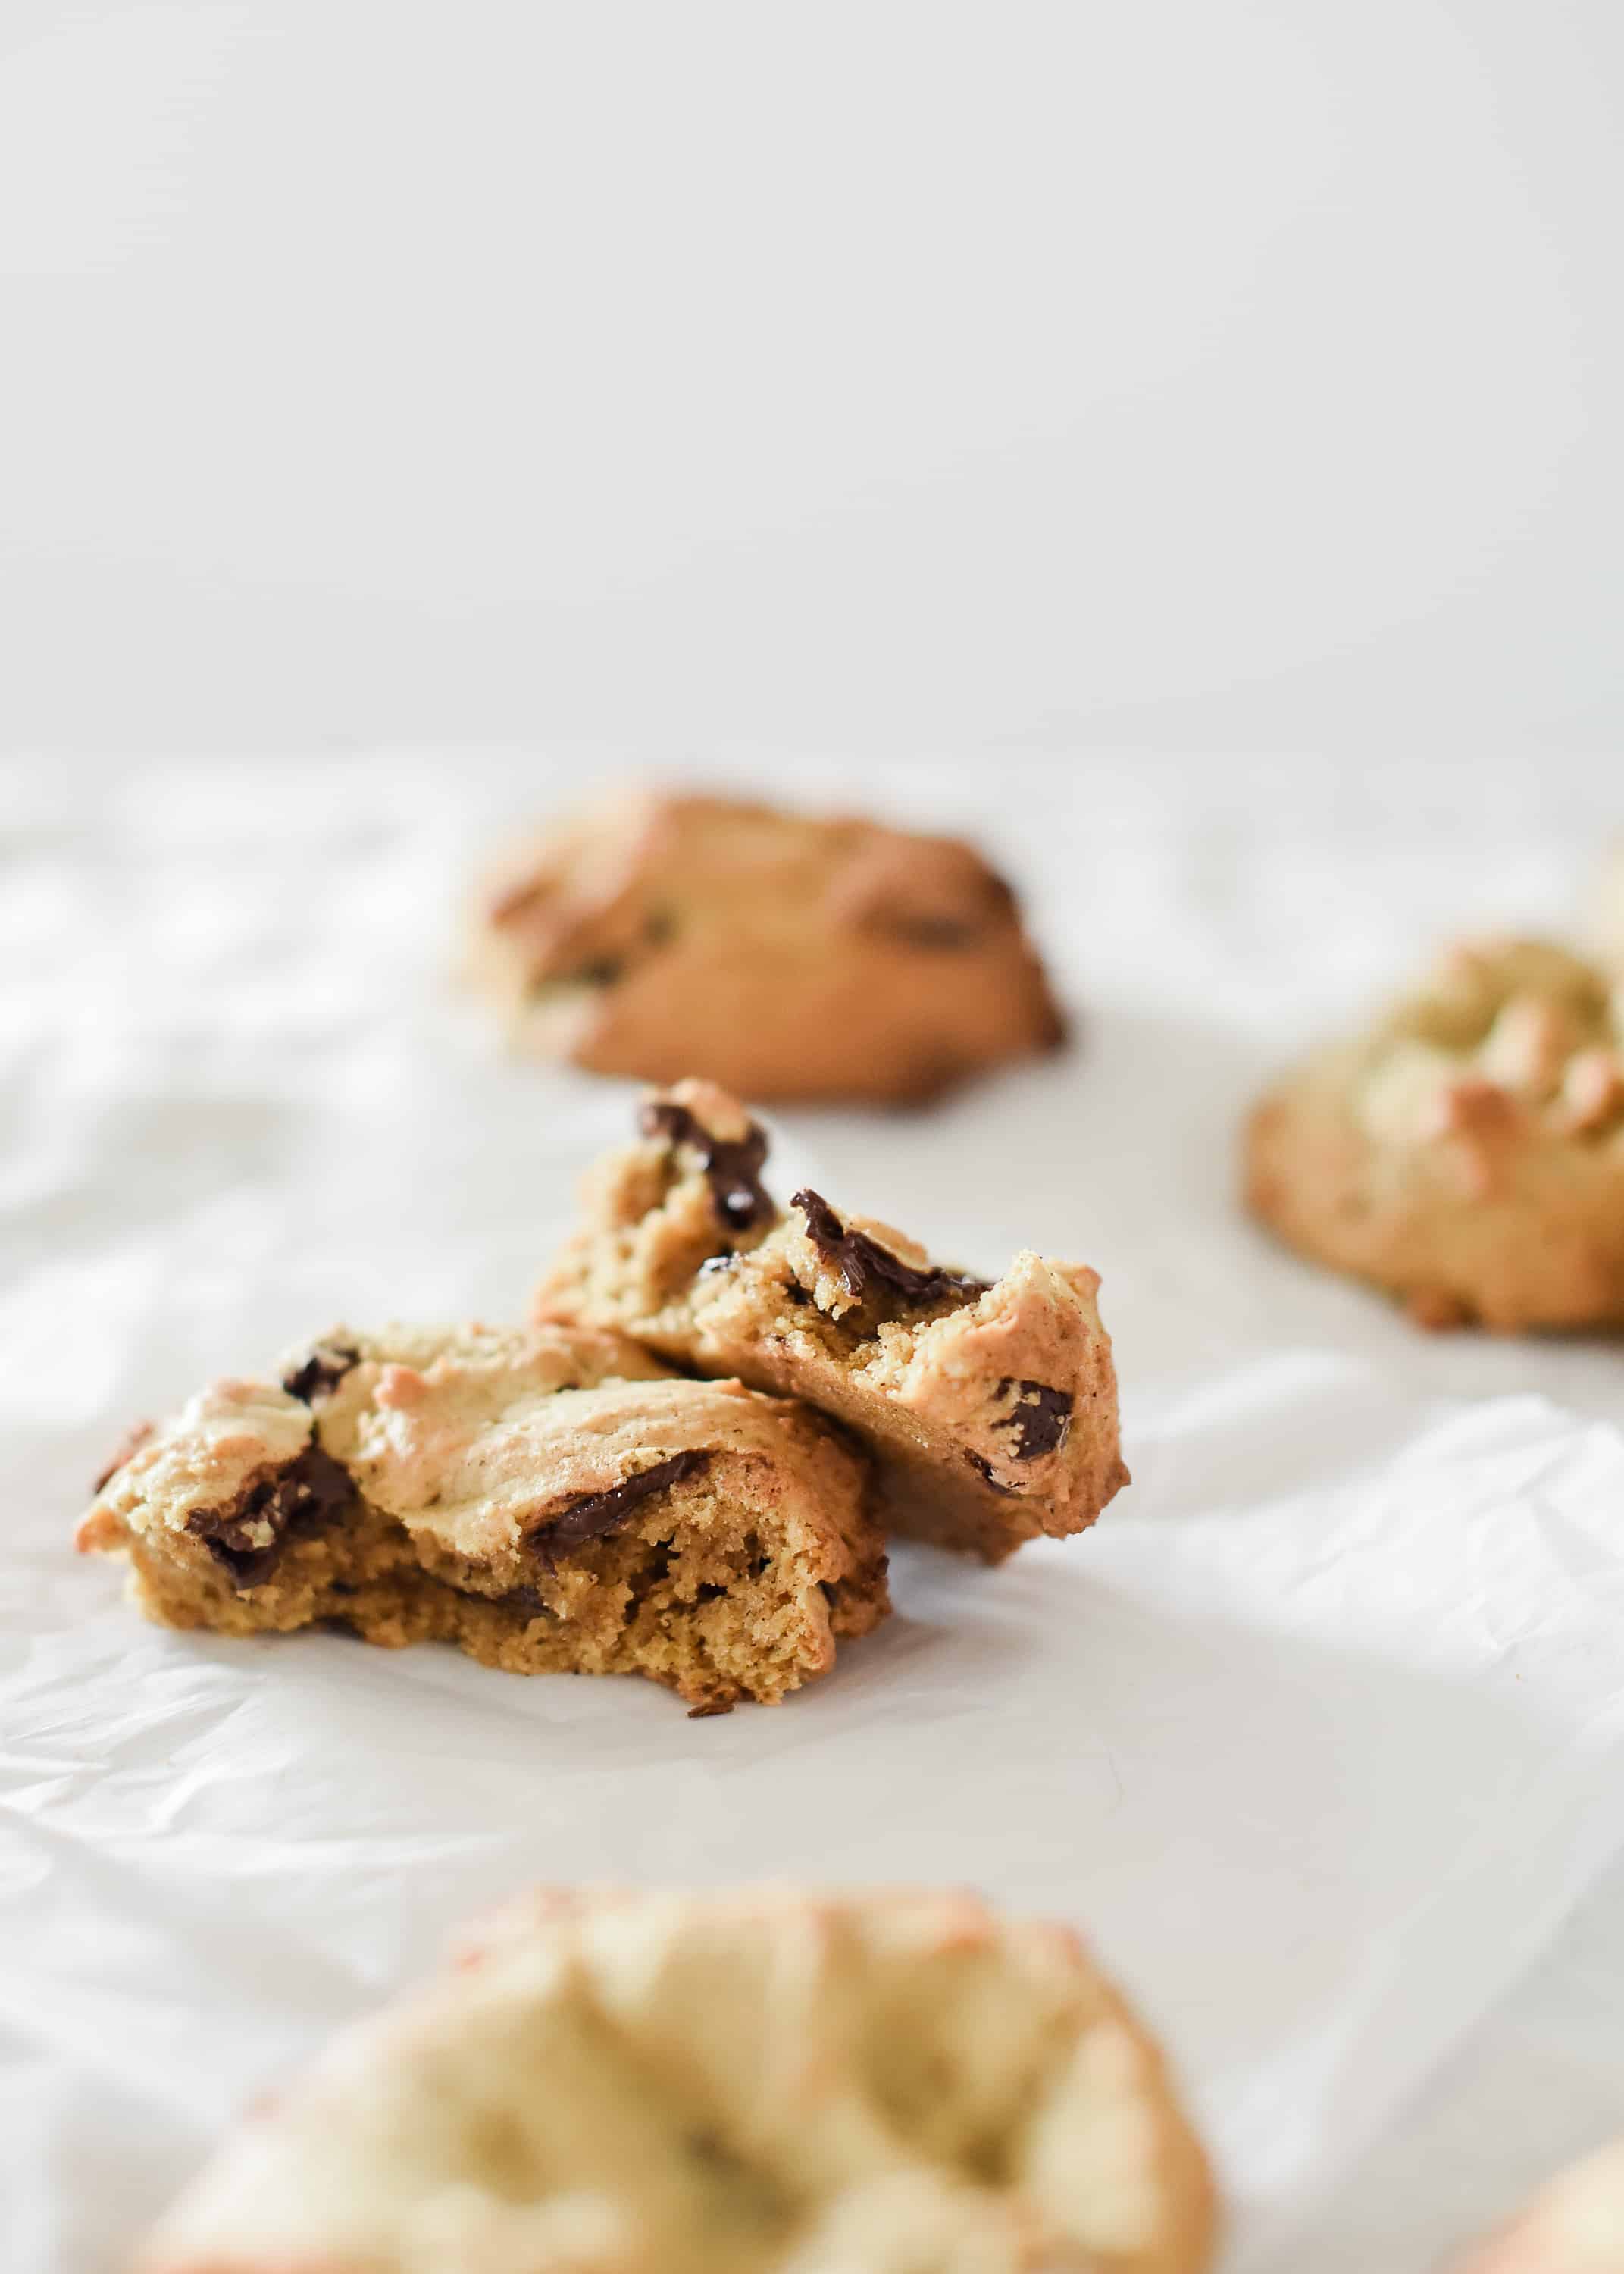 Of all the pumpkin recipes I’ve shared, these pumpkin chocolate chip cookies just might be my favorite. Baked to golden perfection, they are chewy, savory, sweet, and melt in your mouth good…you’re going to love these!